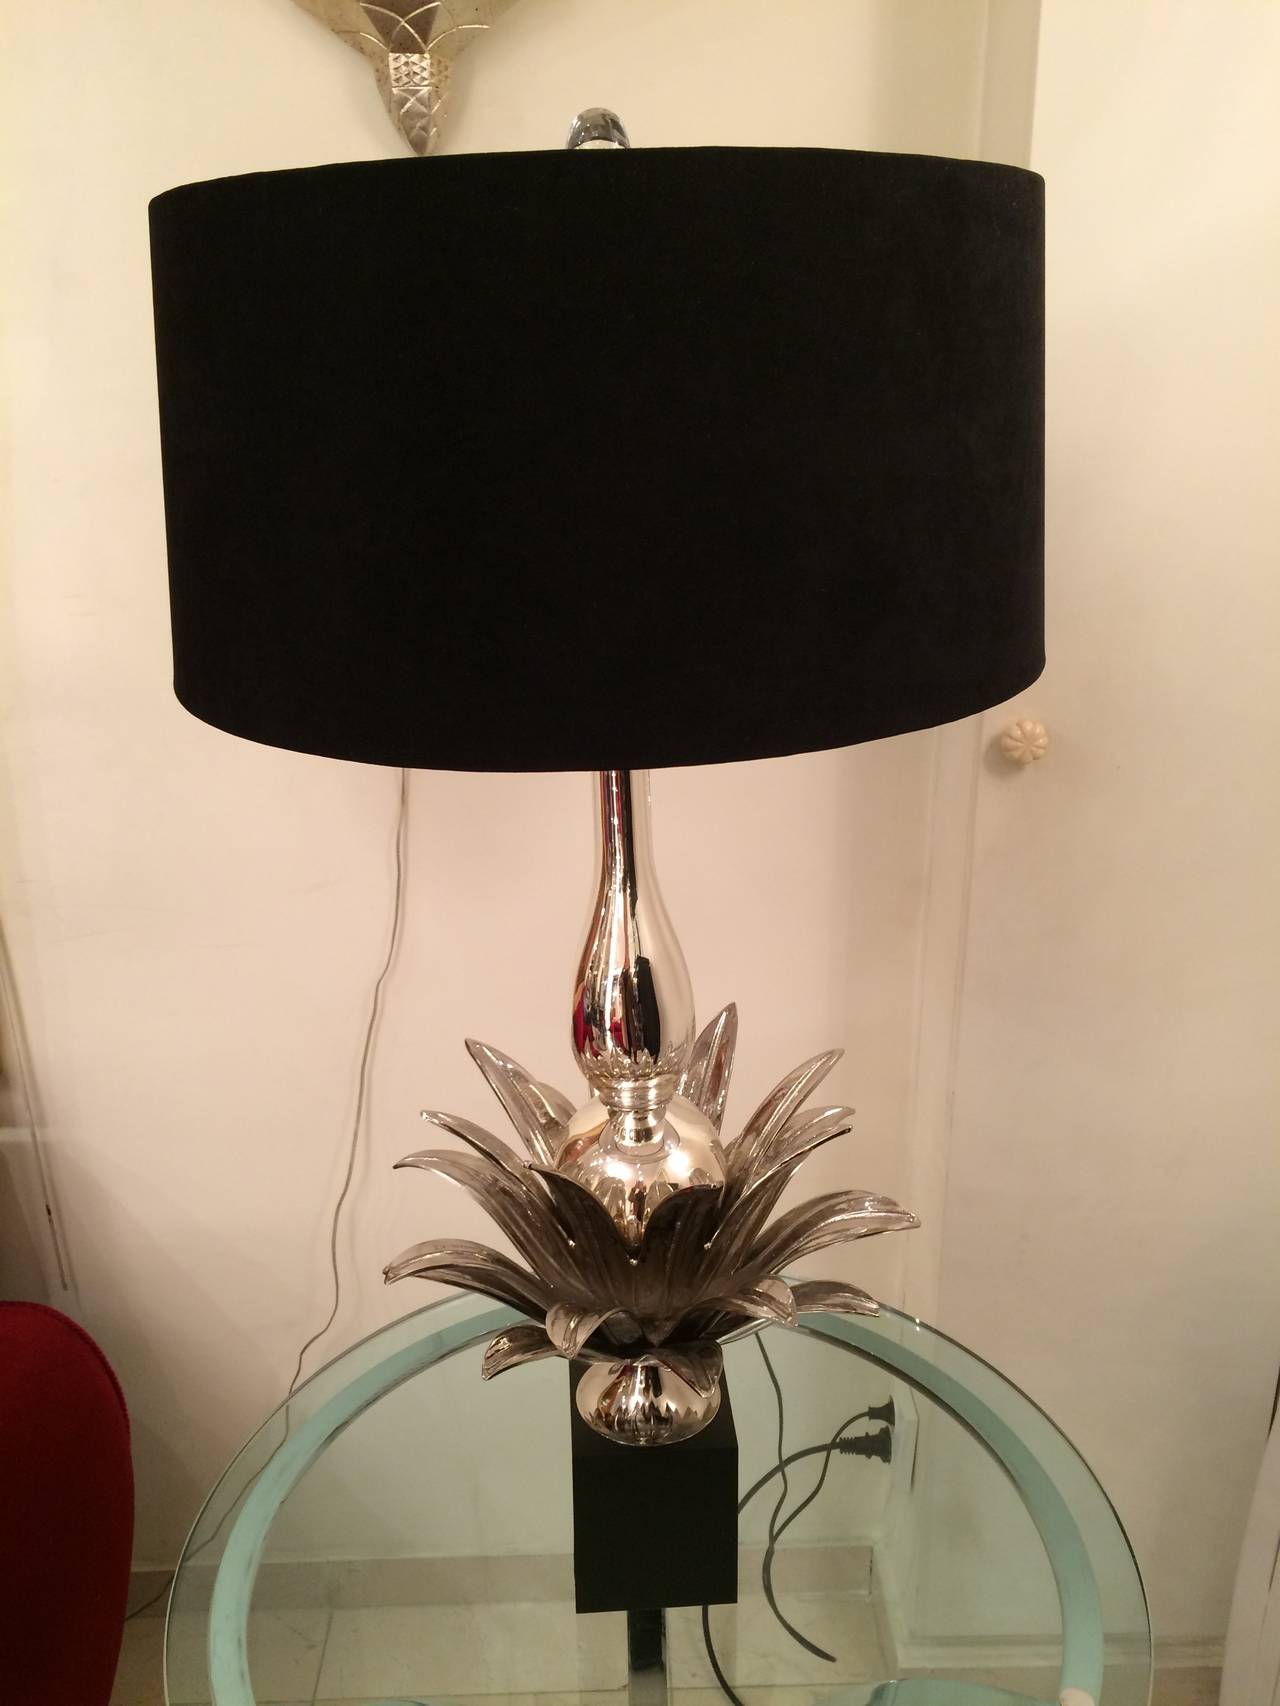 Pair of silvered bronze lamps, base in black bronze, center in silver églomisé glass, new shade in black velvet.
With a silver inside, two lights in each lamp.